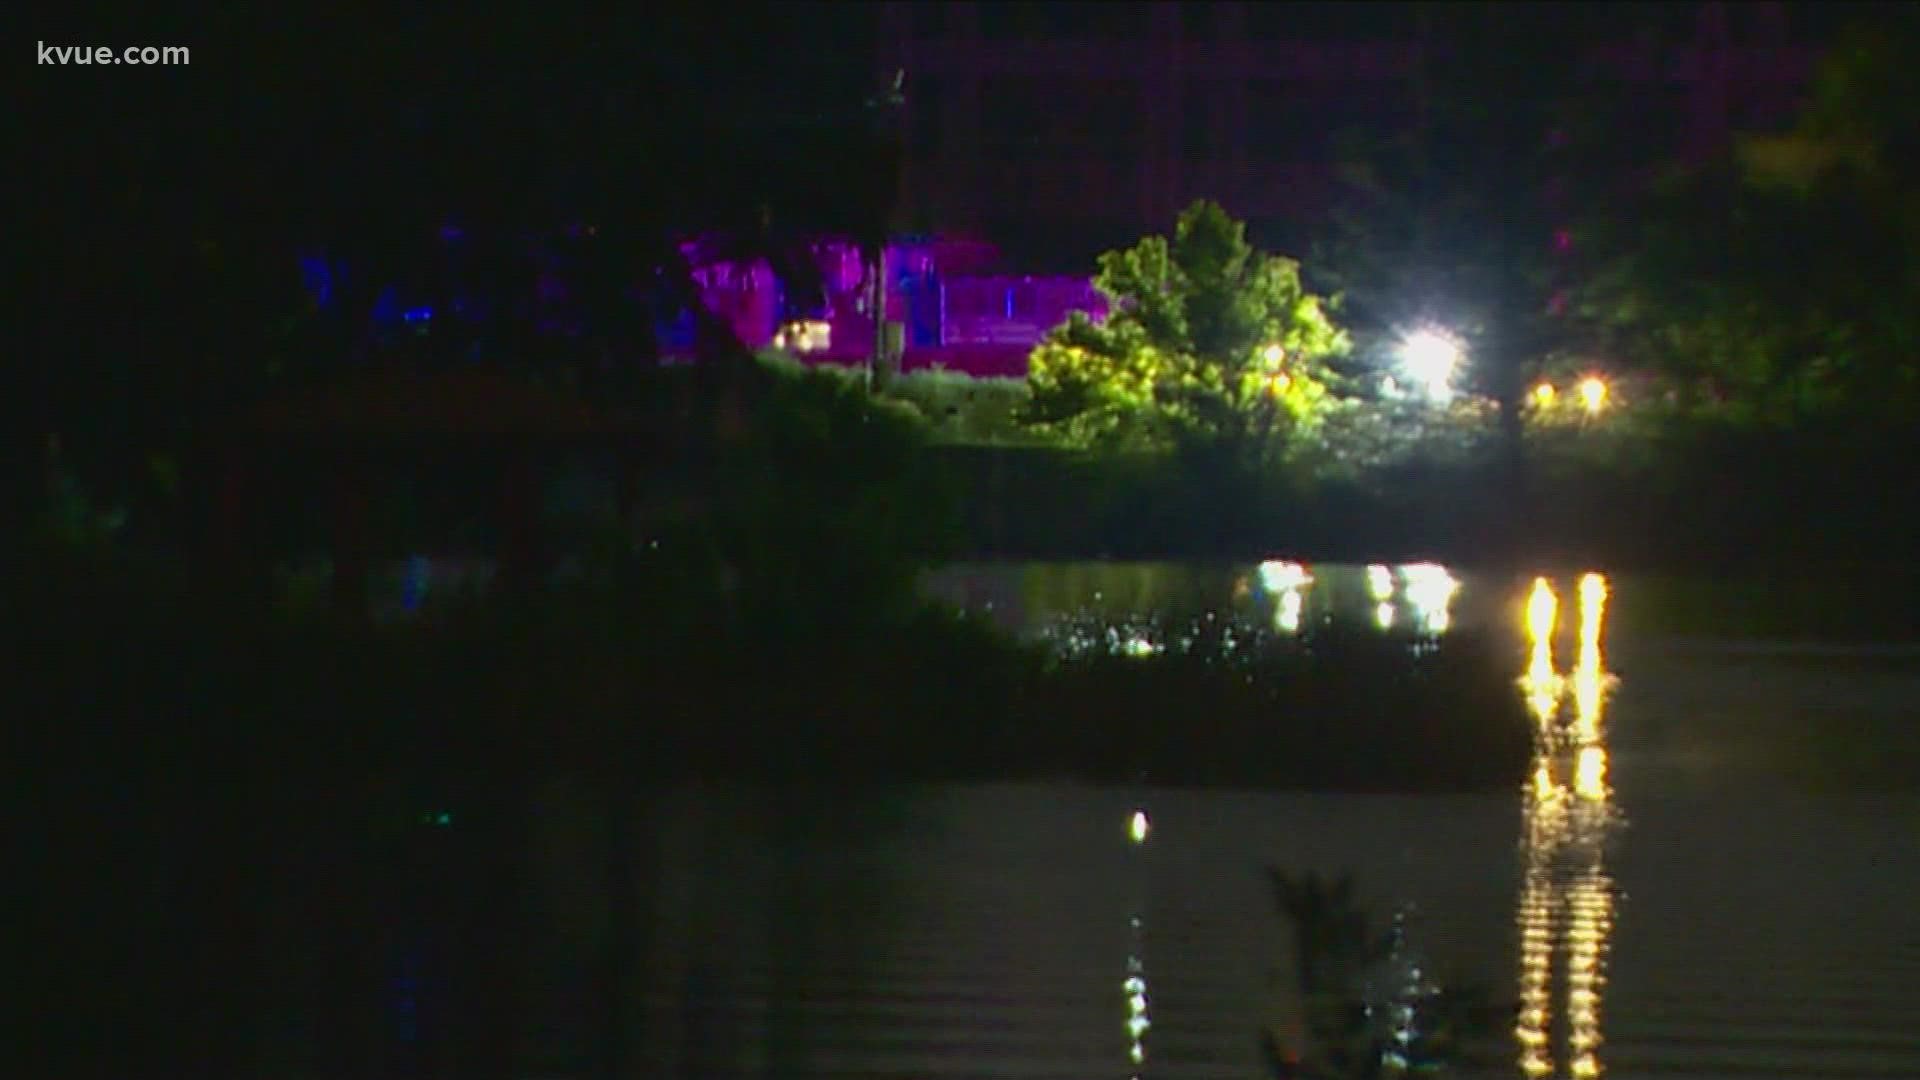 Austin police are charging two men with public lewdness after chasing a suspect across Lady Bird Lake.